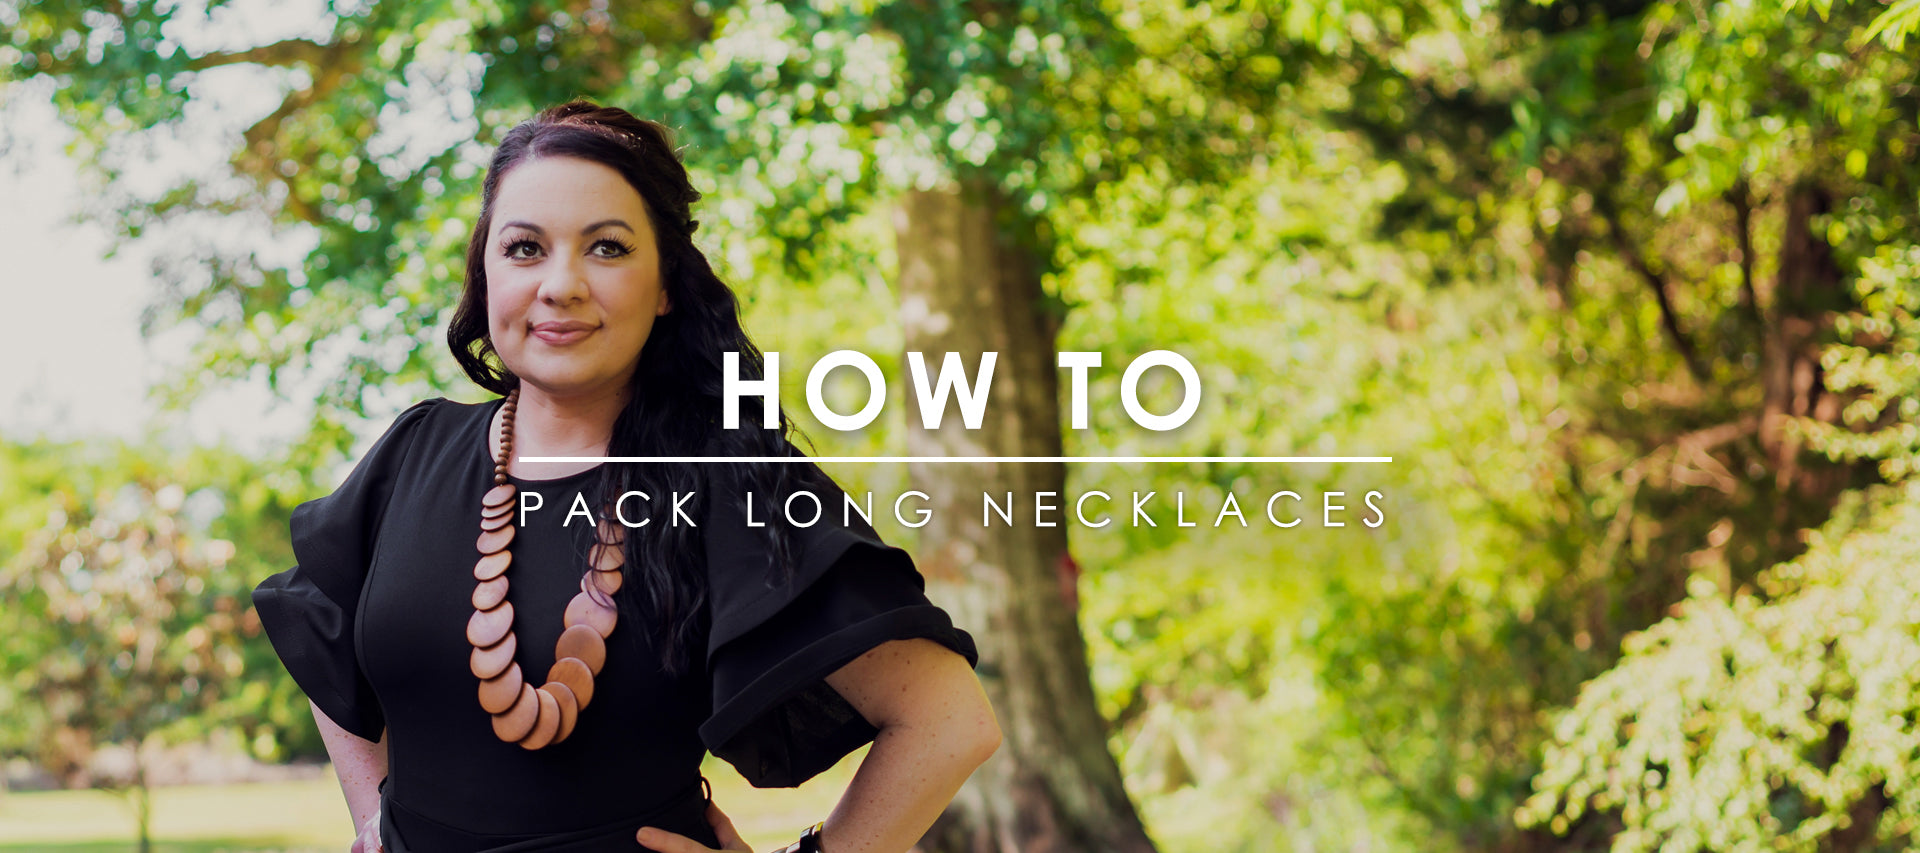 How to Travel with Long Necklaces